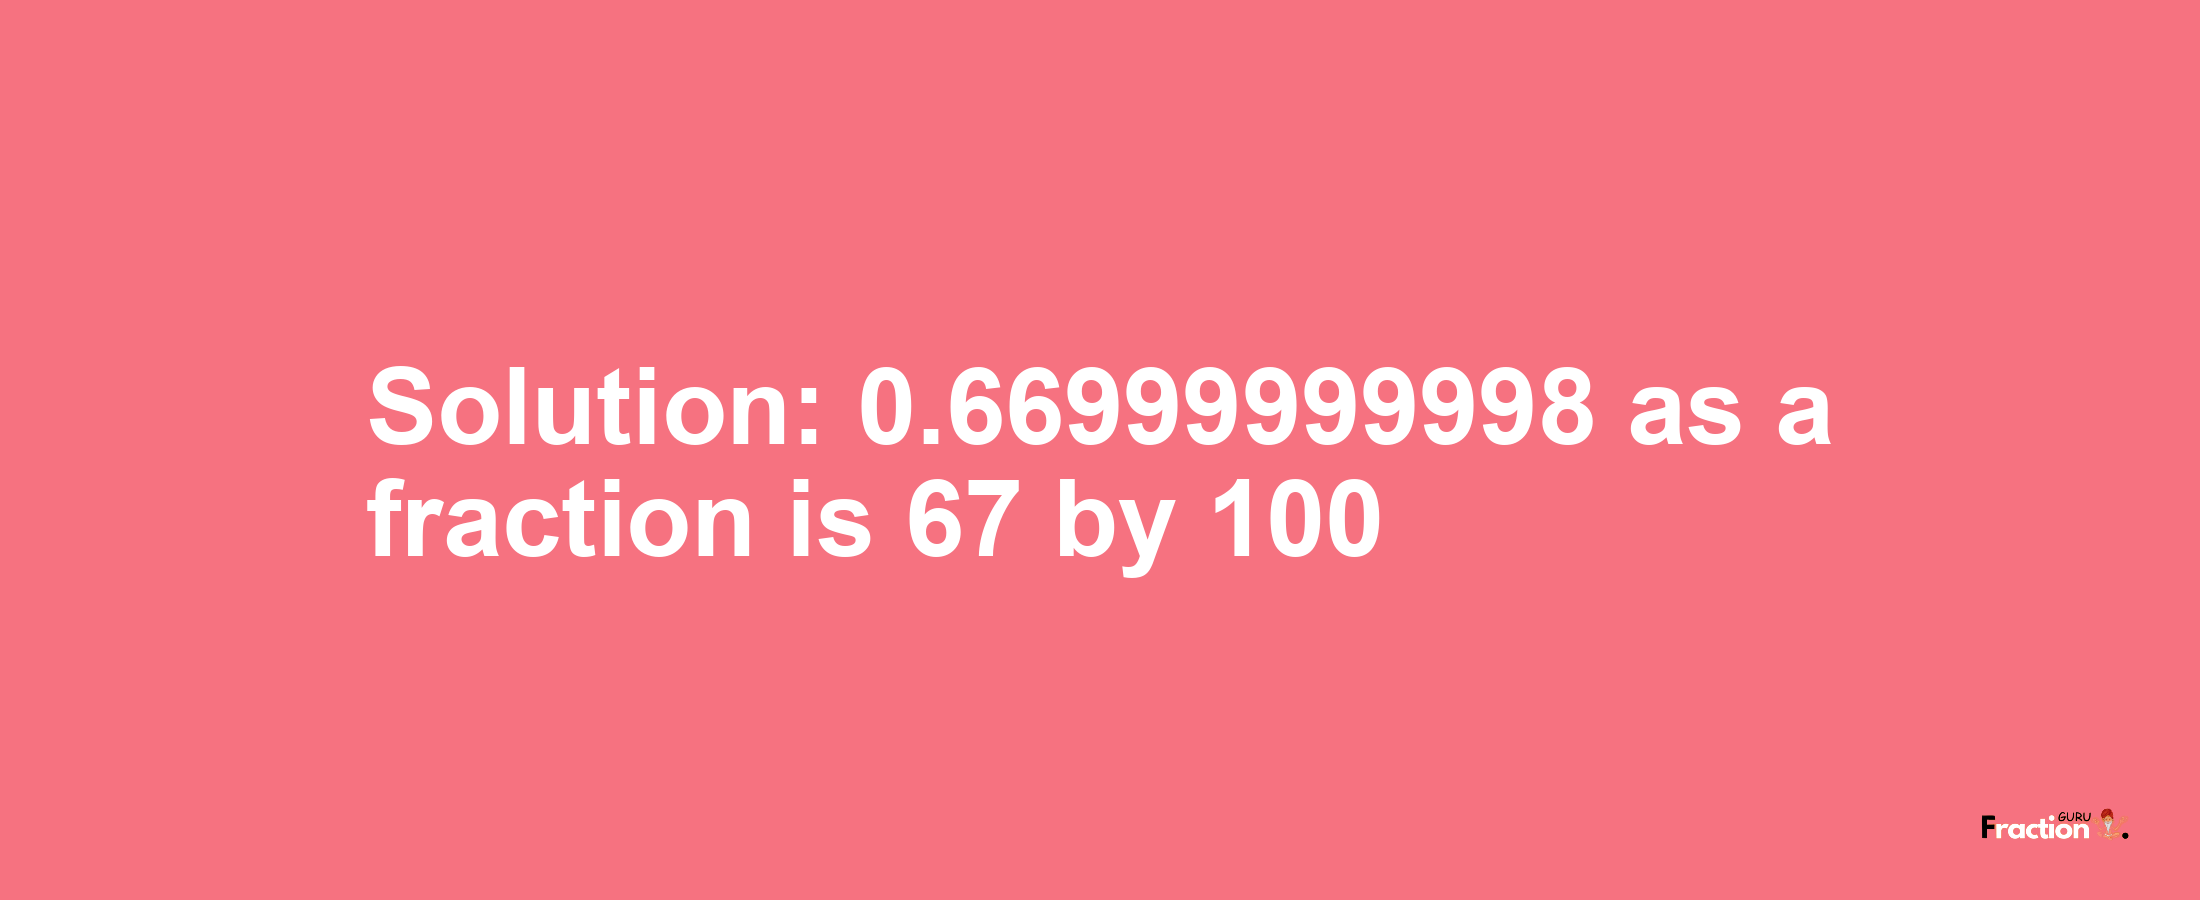 Solution:0.66999999998 as a fraction is 67/100